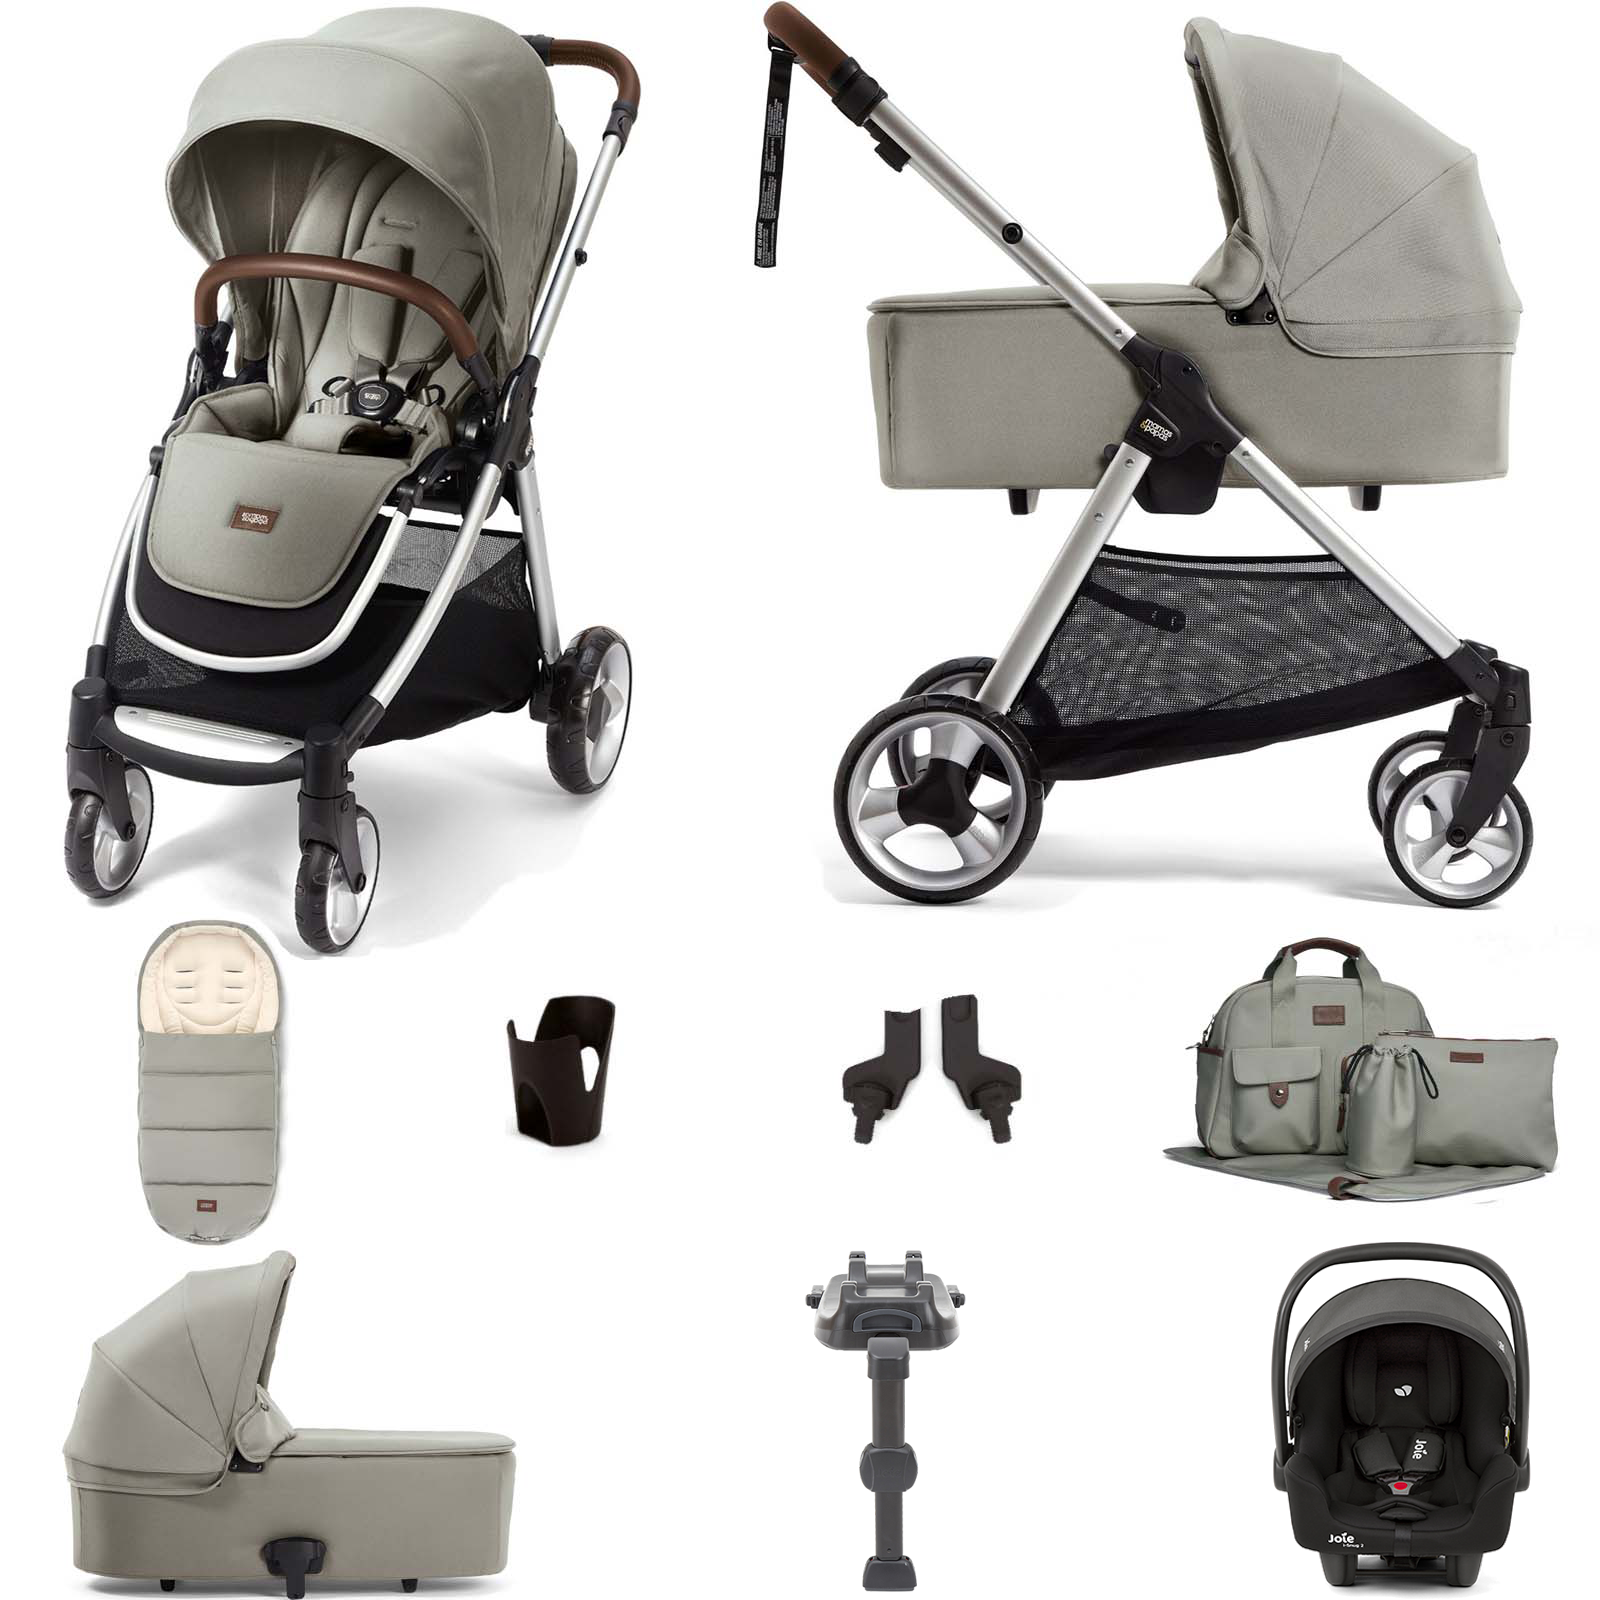 Mamas & Papas Flip XT2 8pc Essentials (i-Size 2 Car Seat) Travel System with Carrycot & ISOFIX Base - Sage Green